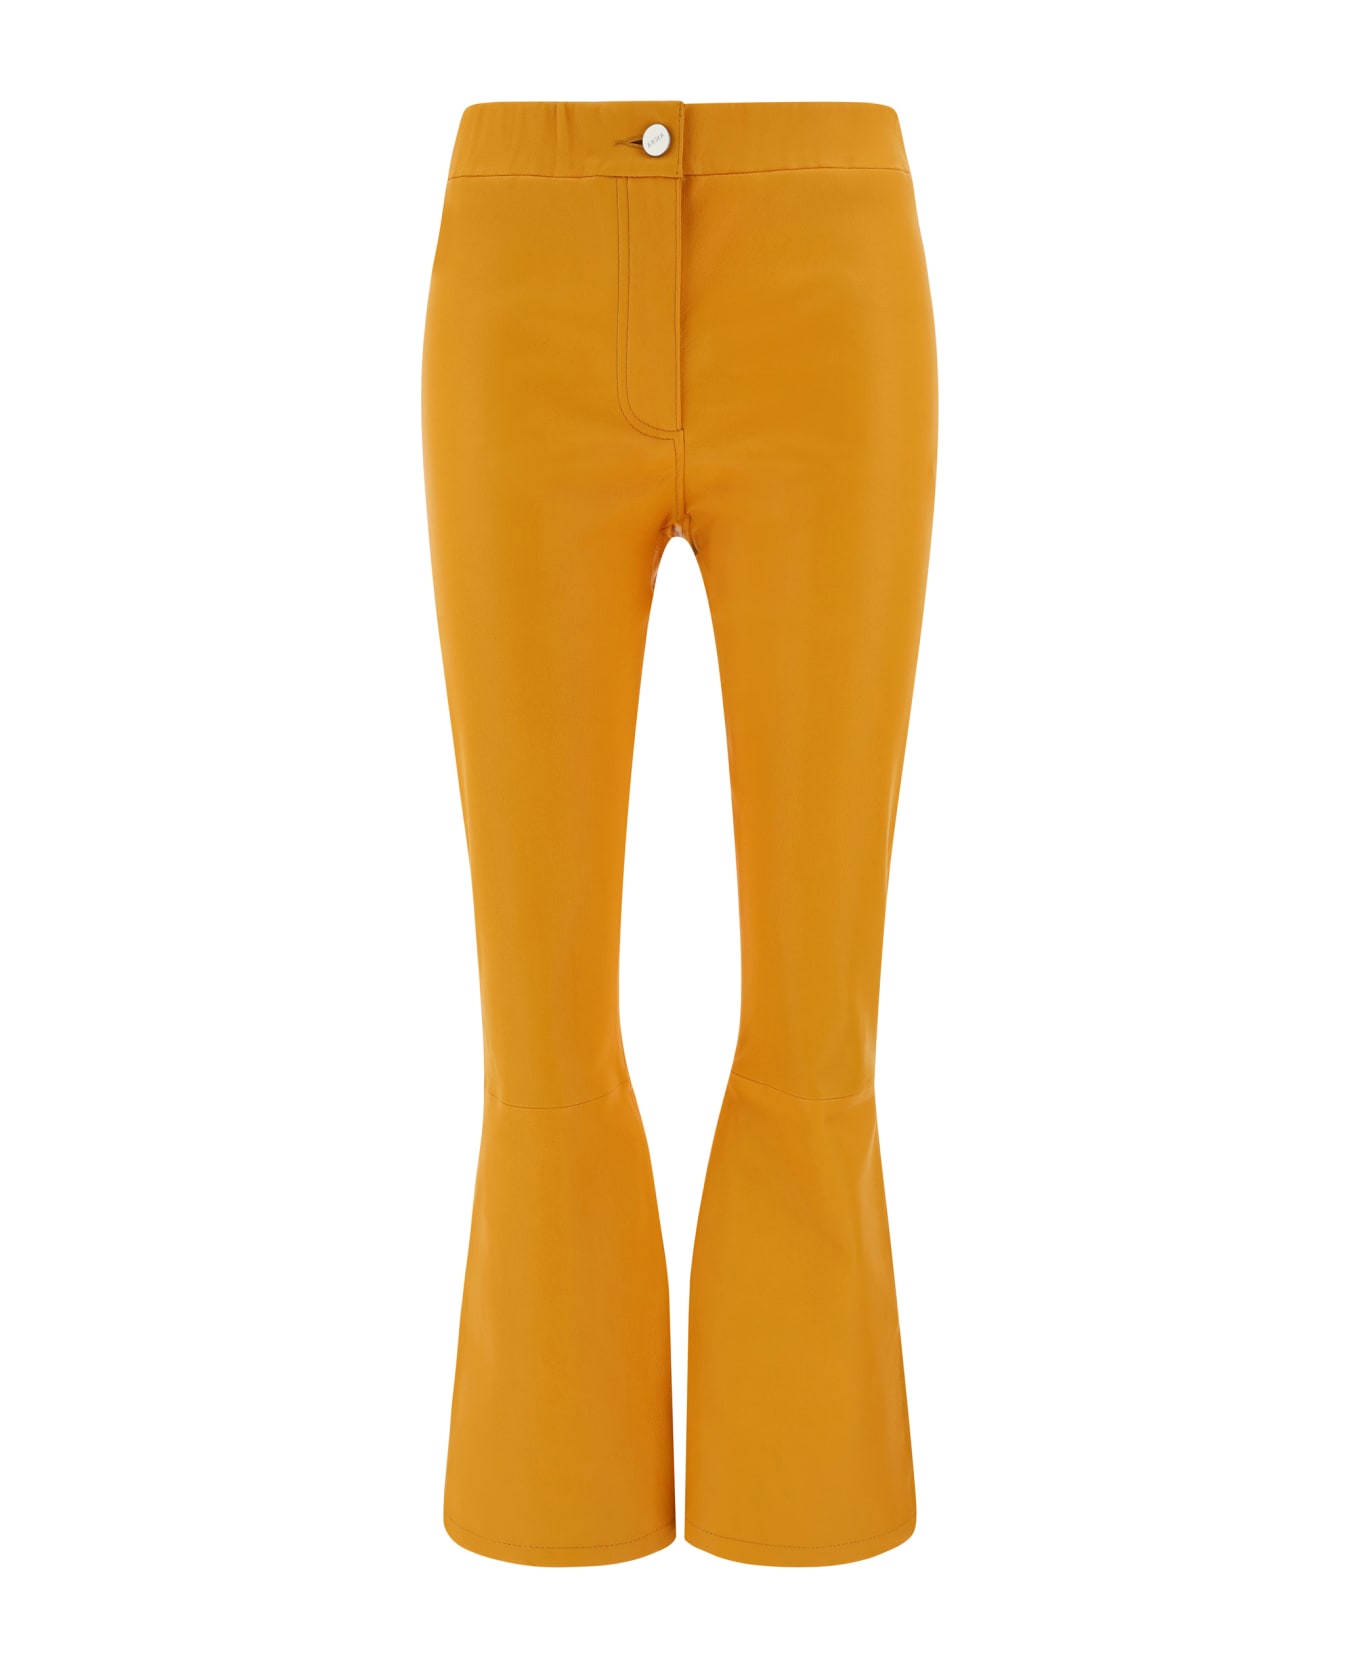 ARMA Lively Pants - Apricot ボトムス